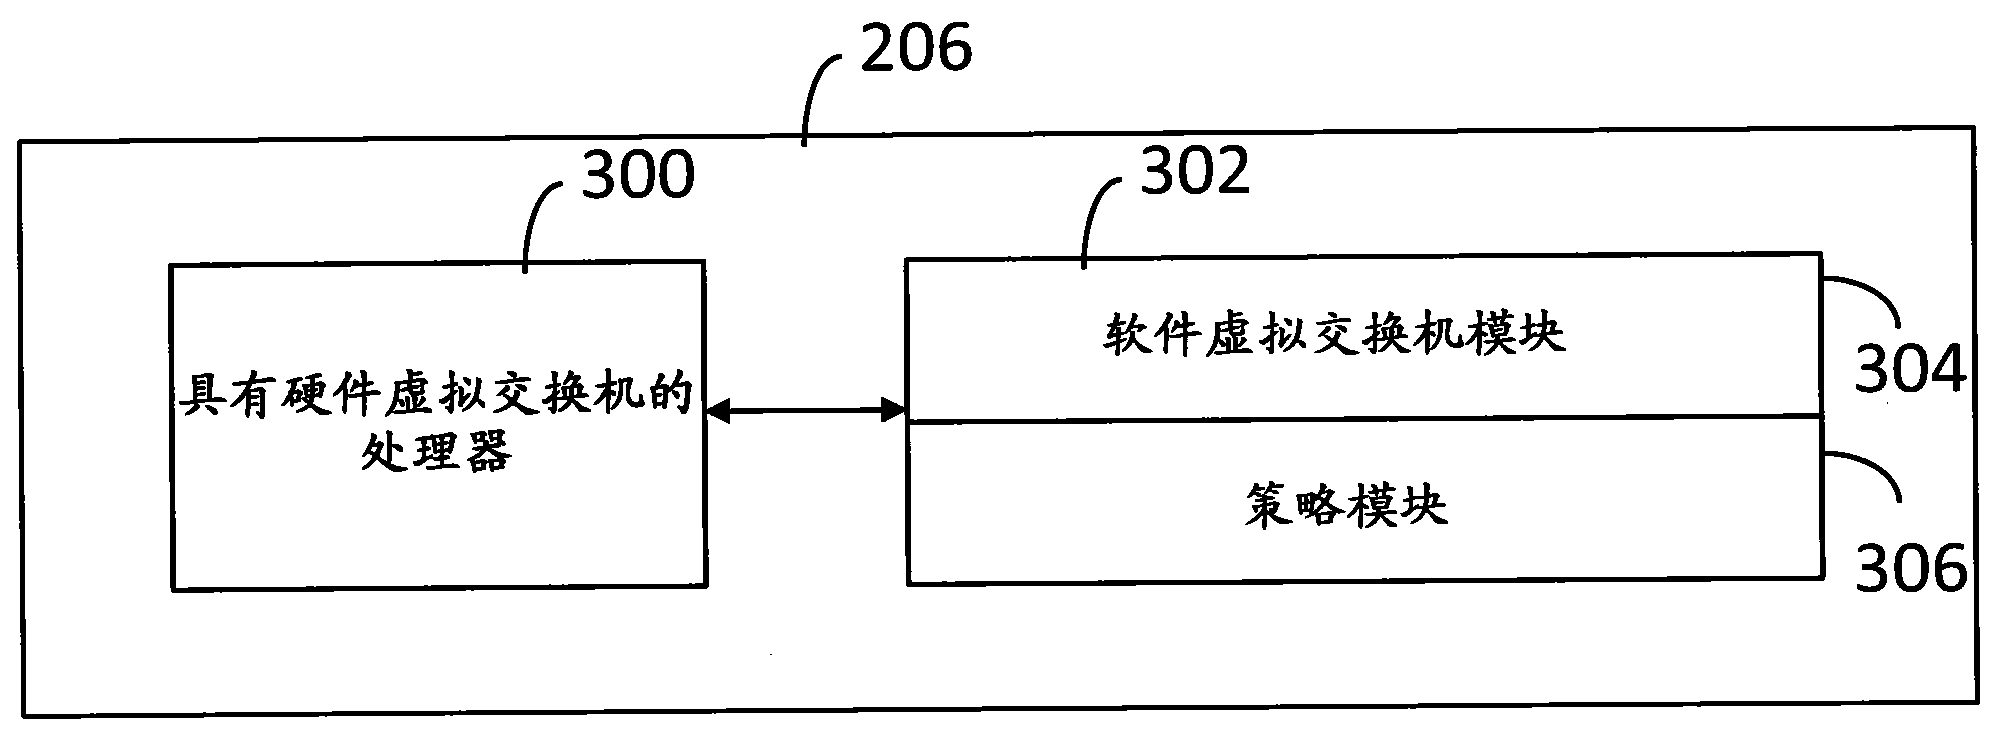 Network interface card with virtual switch and traffic flow policy enforcement